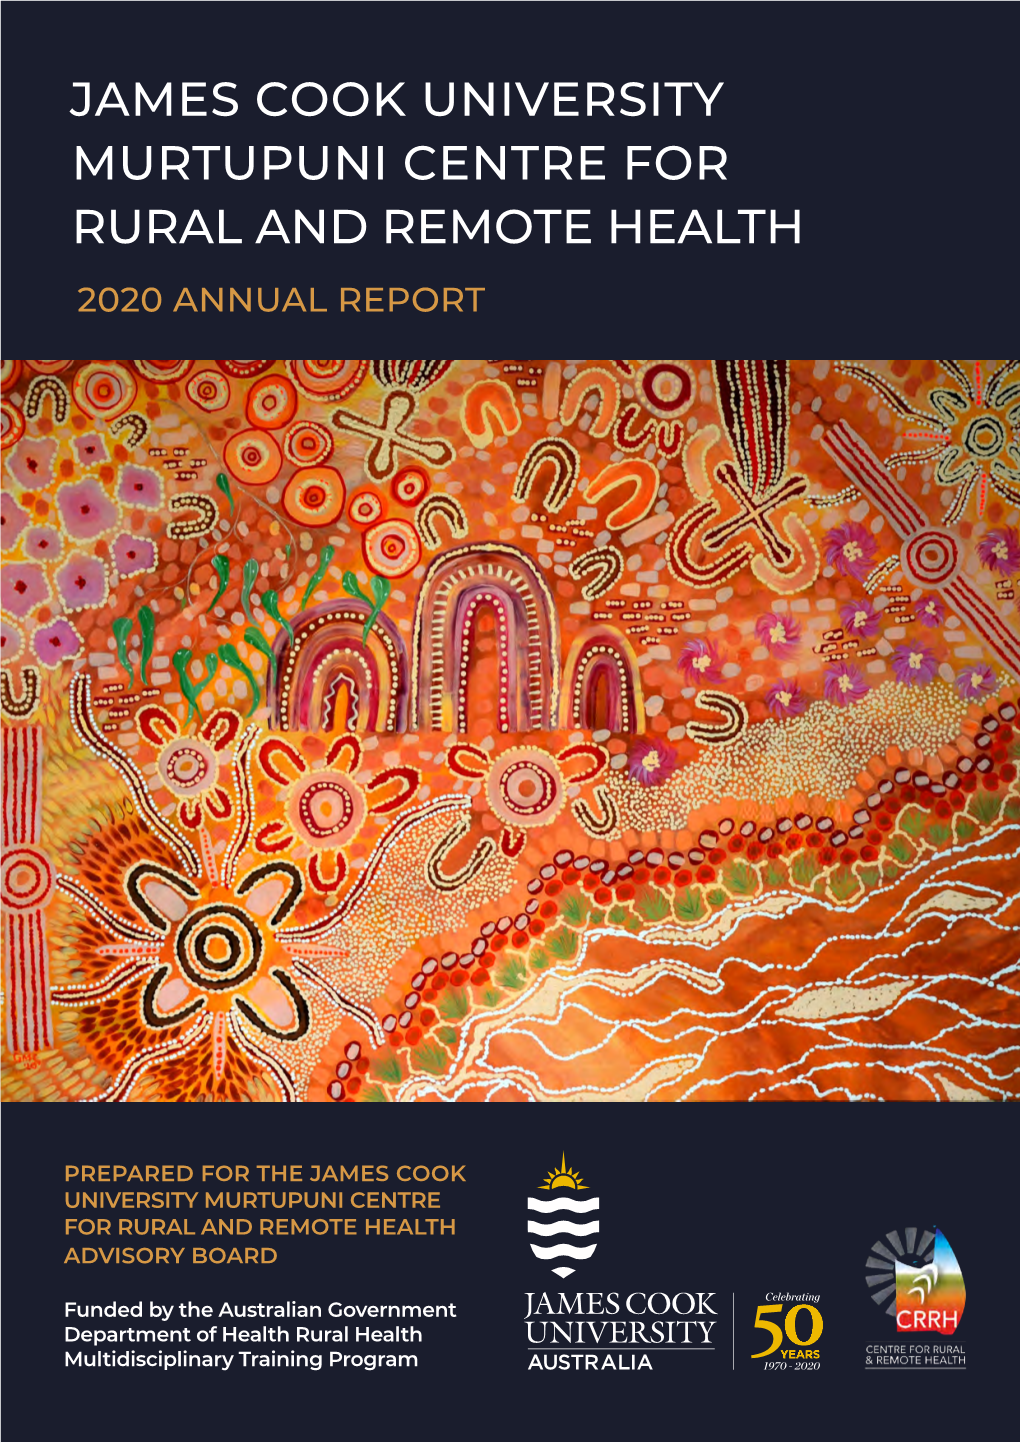 James Cook University Murtupuni Centre for Rural and Remote Health 2020 Annual Report